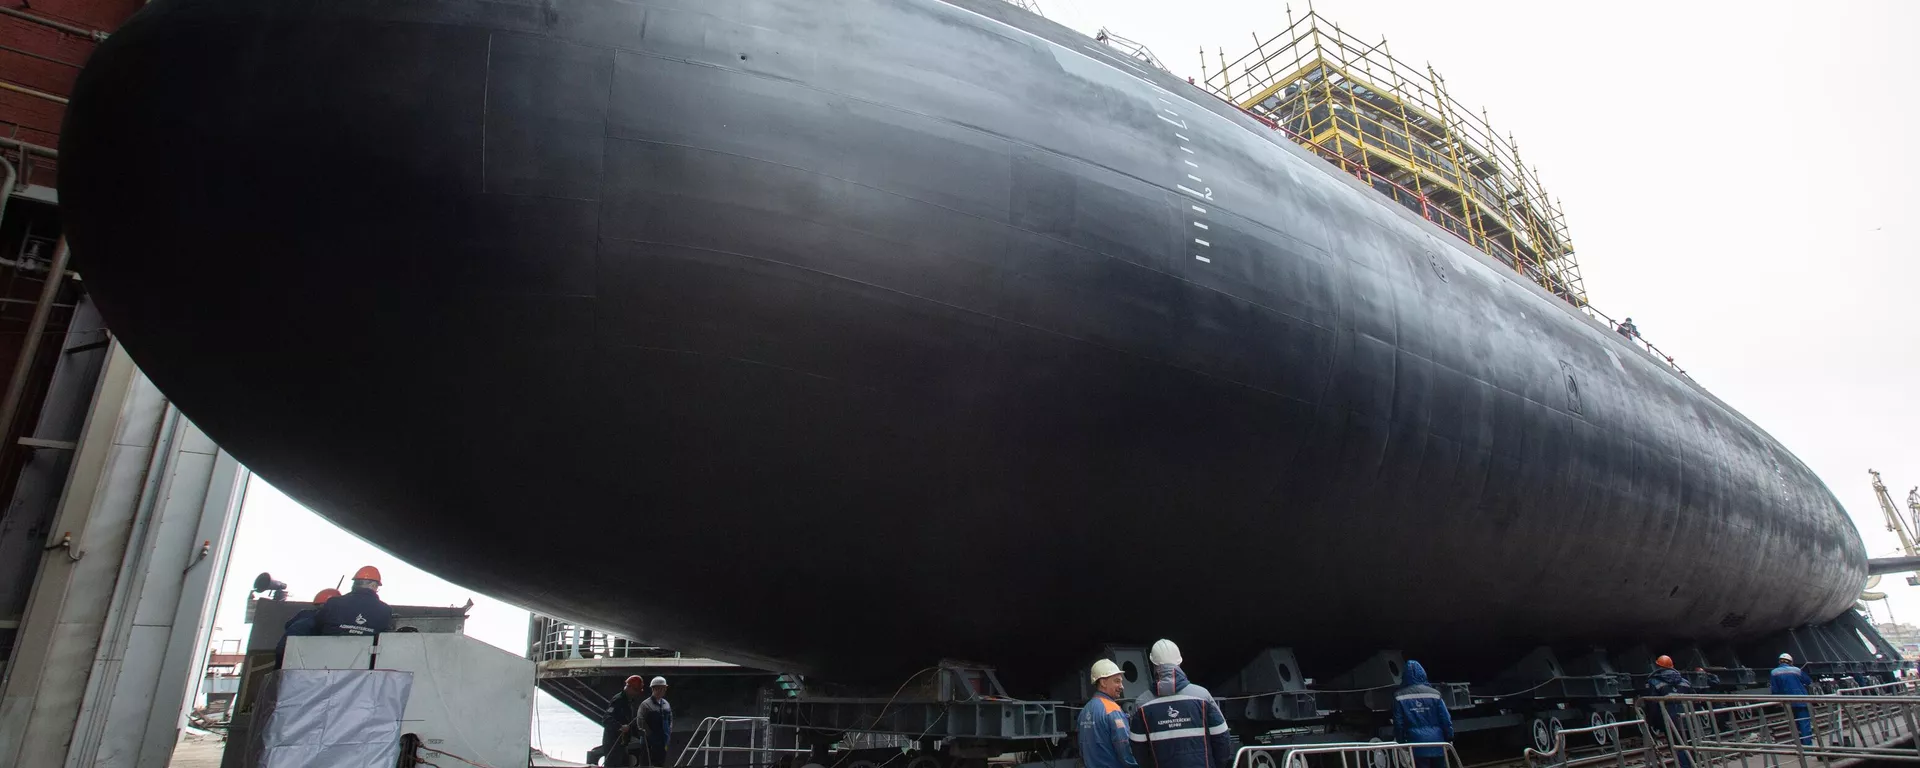 Workers prepare to launch the Mozhaisk, the latest Project 636.3 submarine built for Russia's Pacific Fleet. - Sputnik International, 1920, 28.04.2023